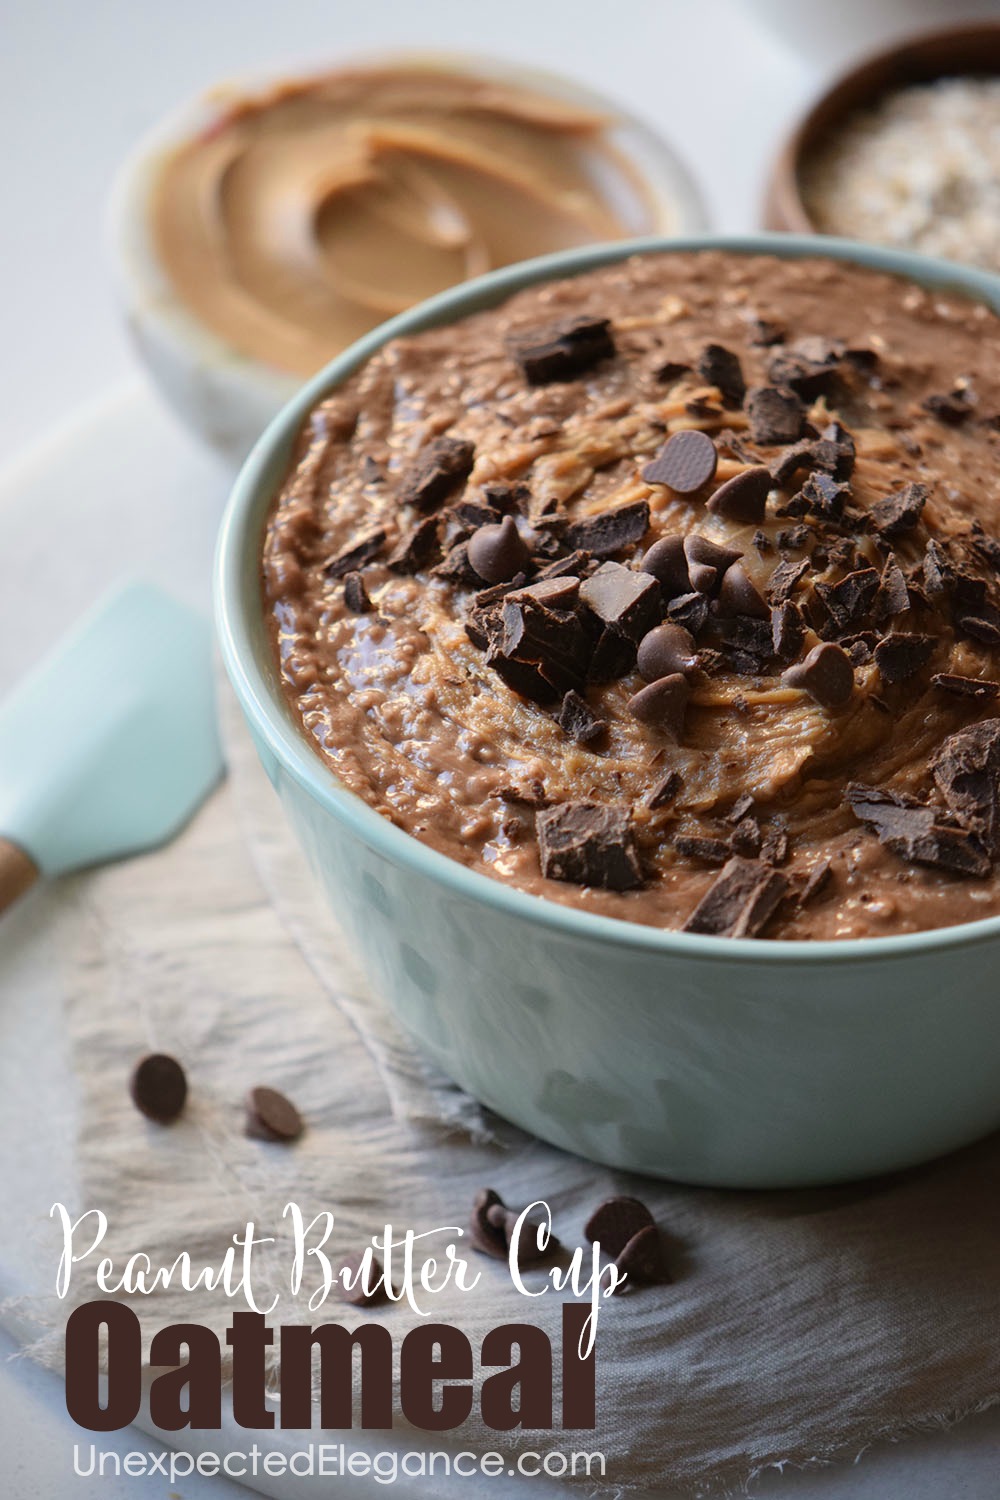 If you love the peanut butter and chocolate combo, then you have to give this peanut butter cup oatmeal recipe a try! It's great for breakfast or dessert!